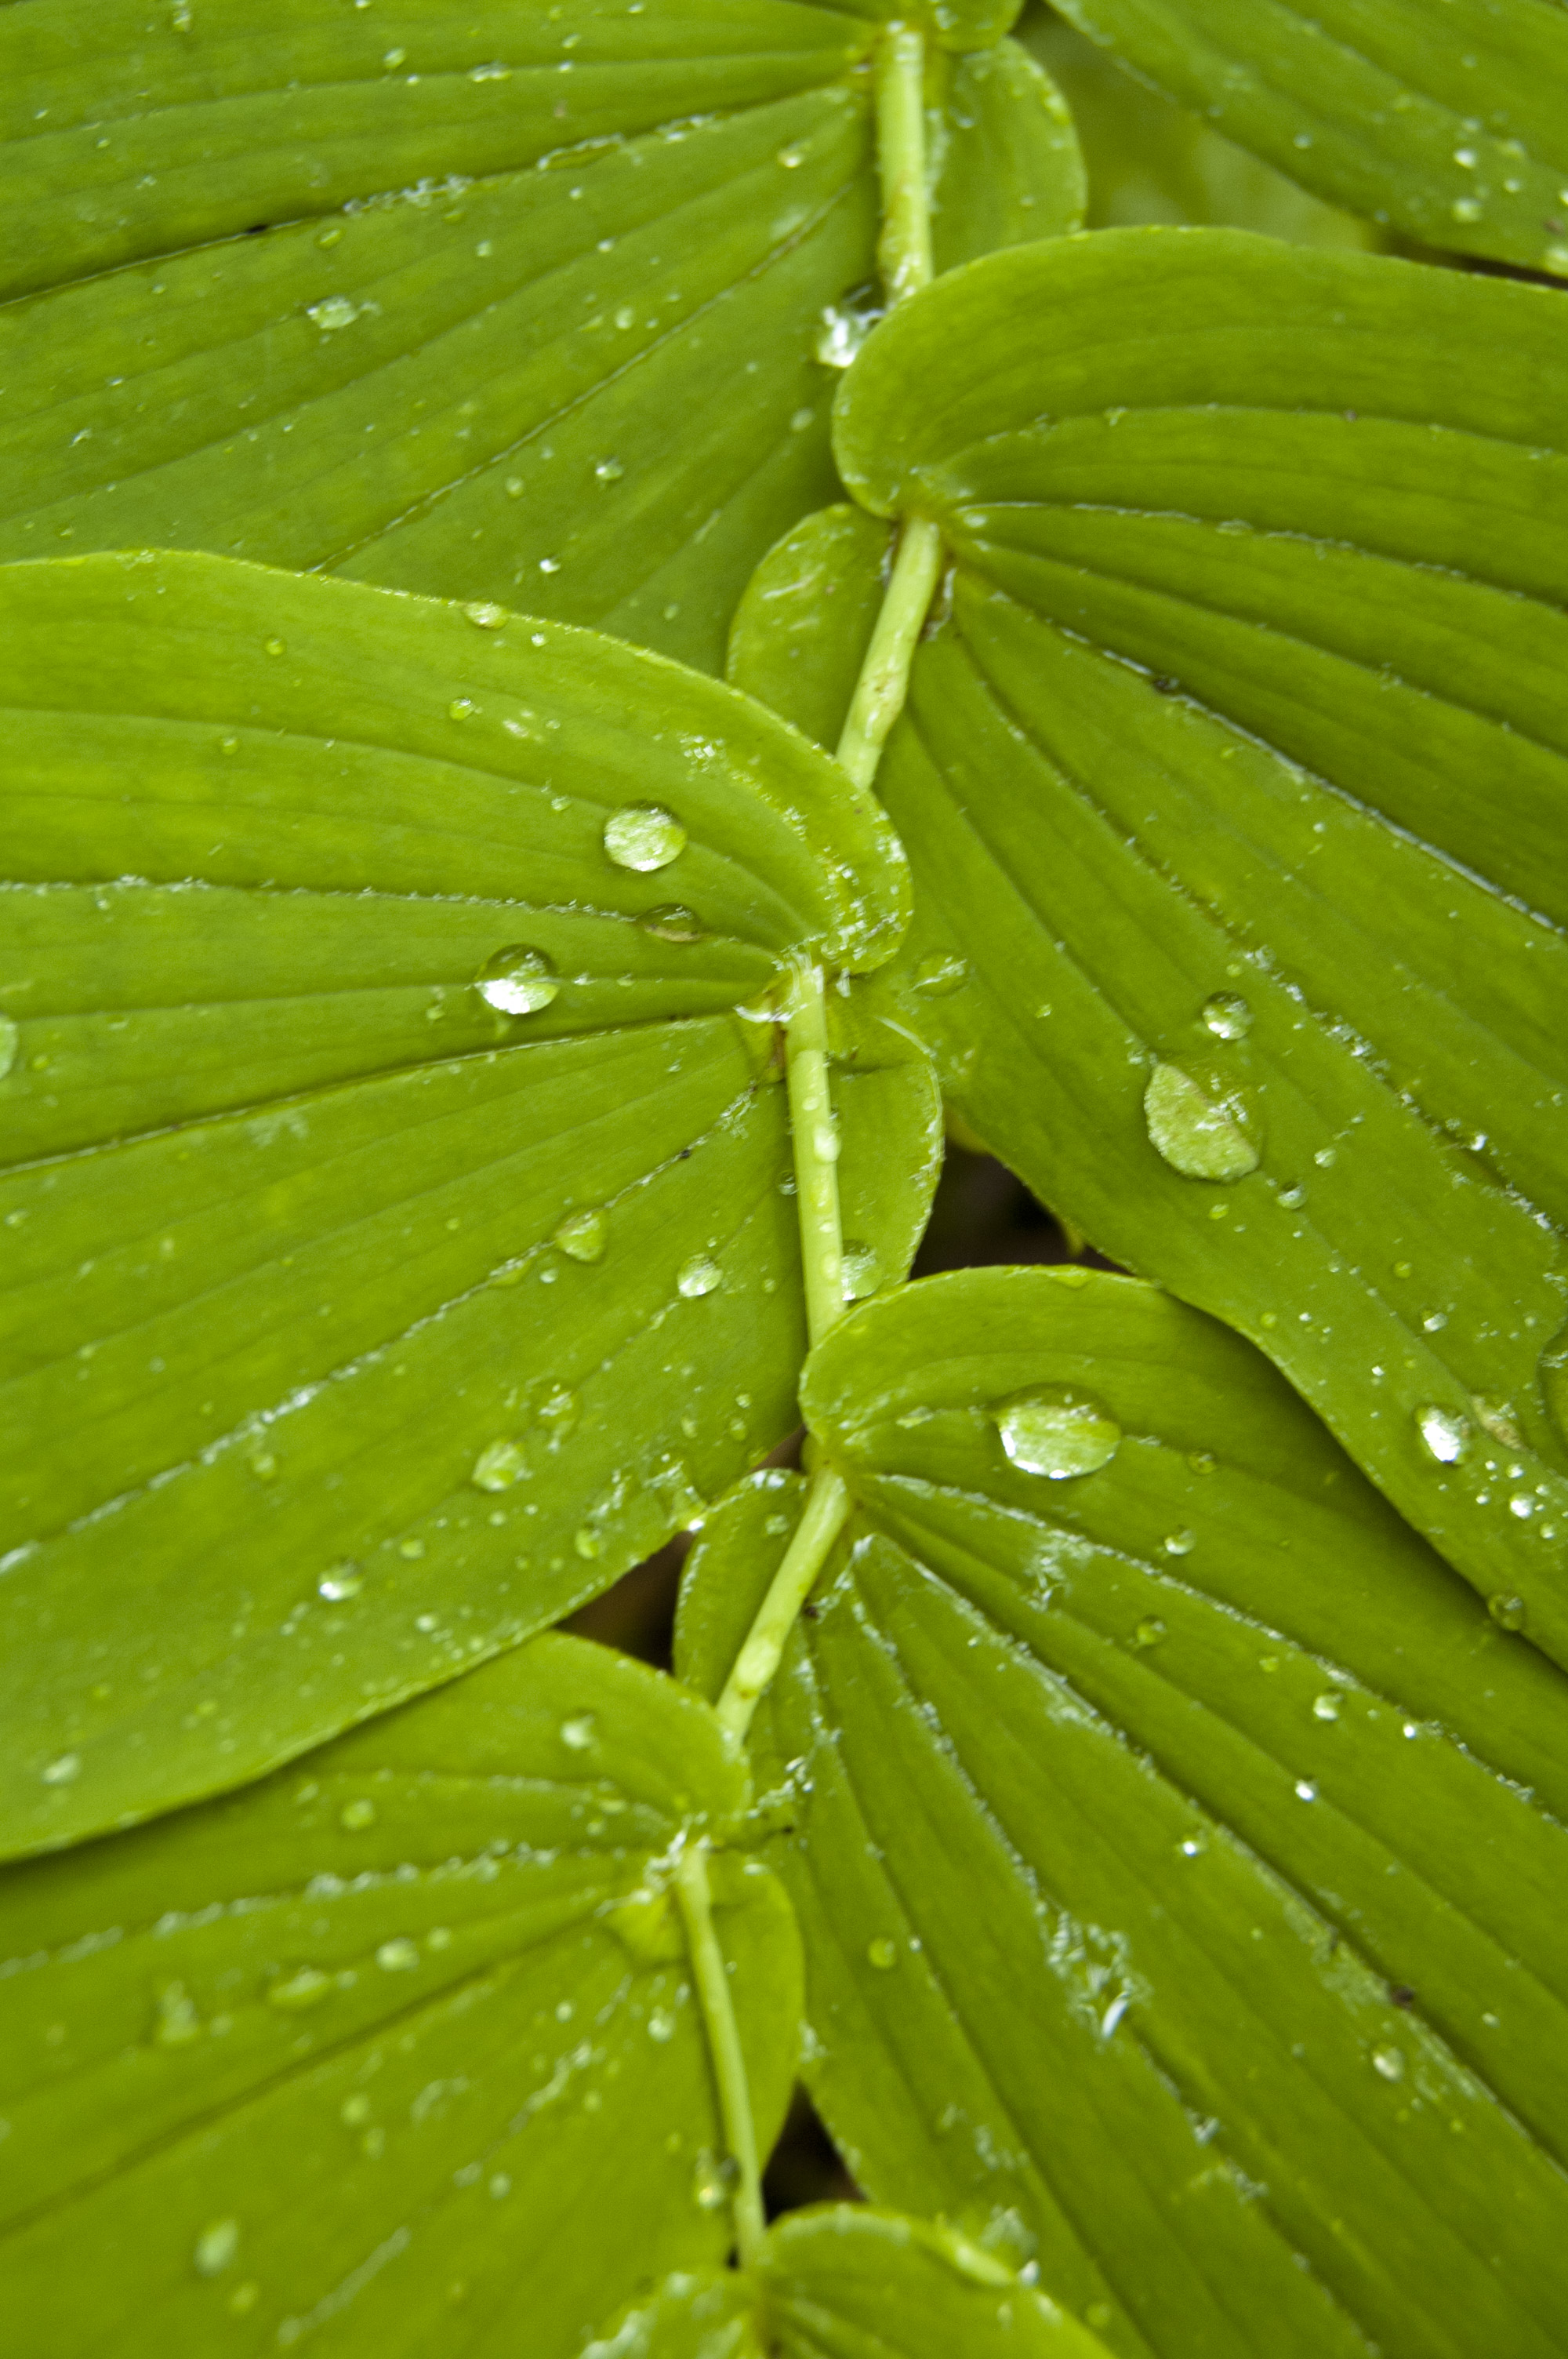 A close up of a green leaf with water droplets on it.